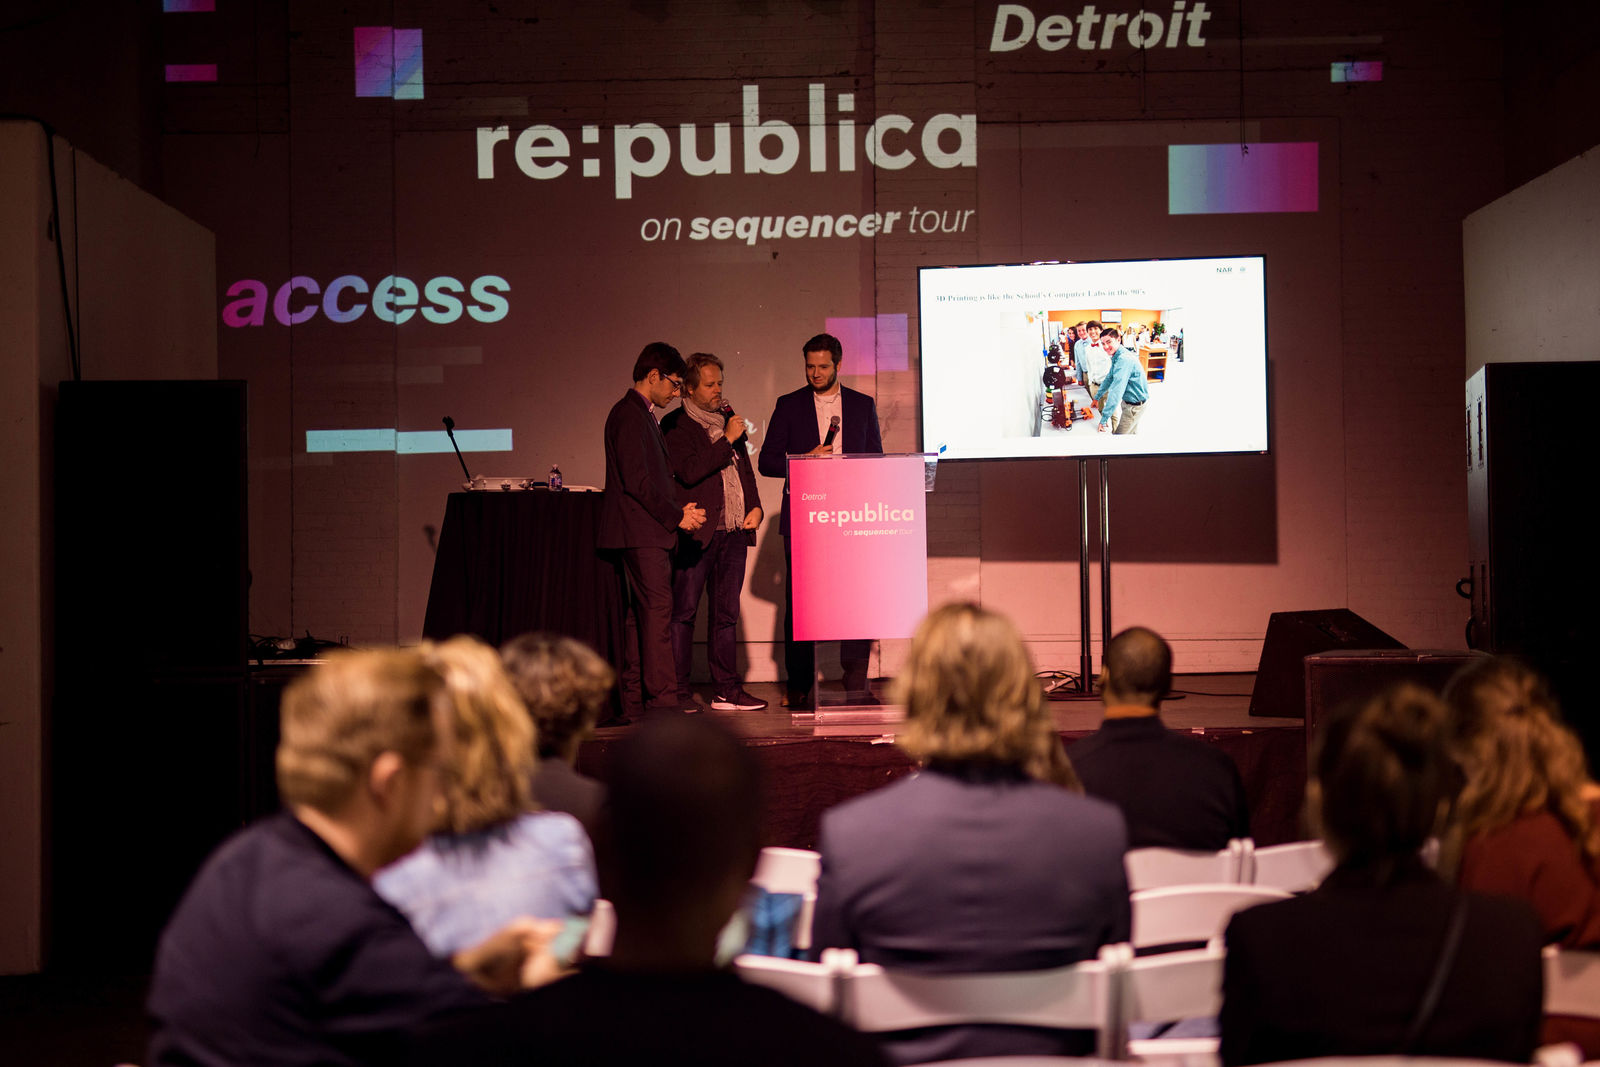 Europe’s largest internet and digital society conference in the U.S.: Volkswagen supports re:publica in Detroit